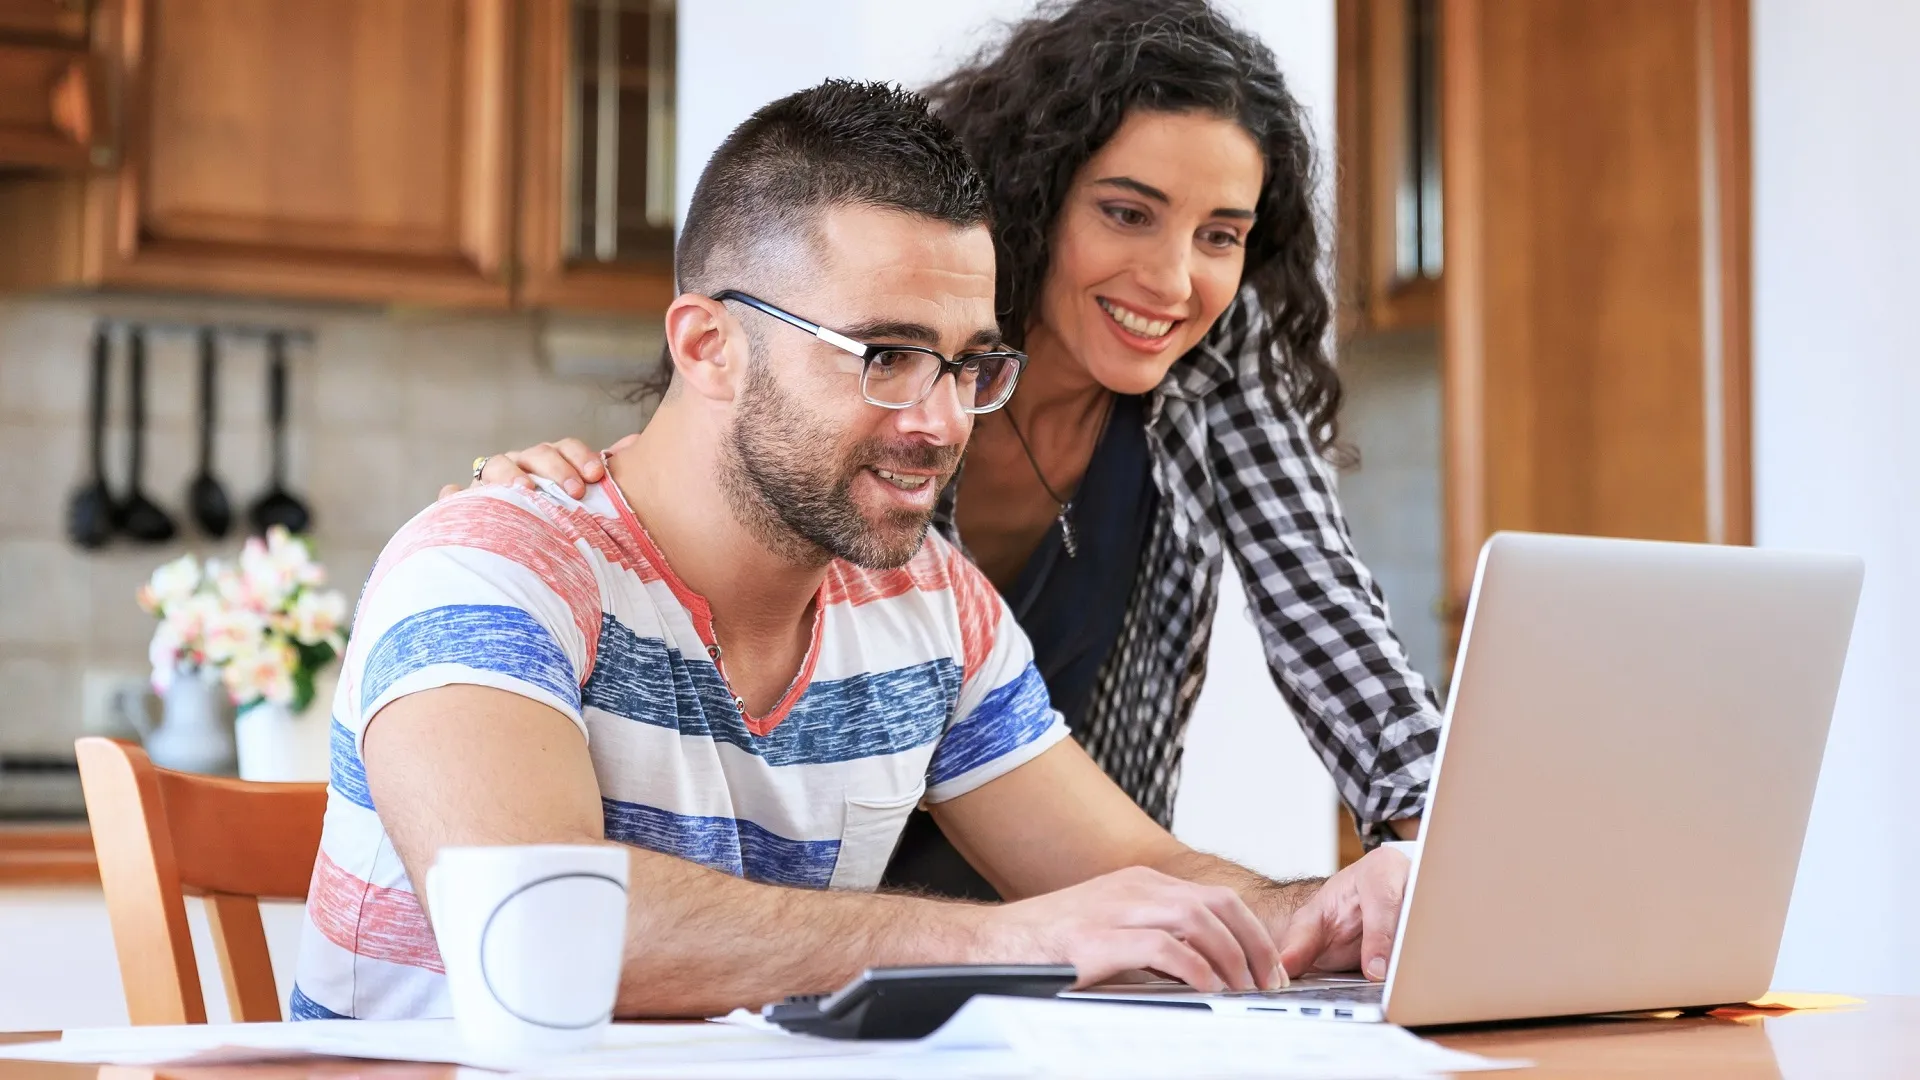 Couple using laptop at home stock photo